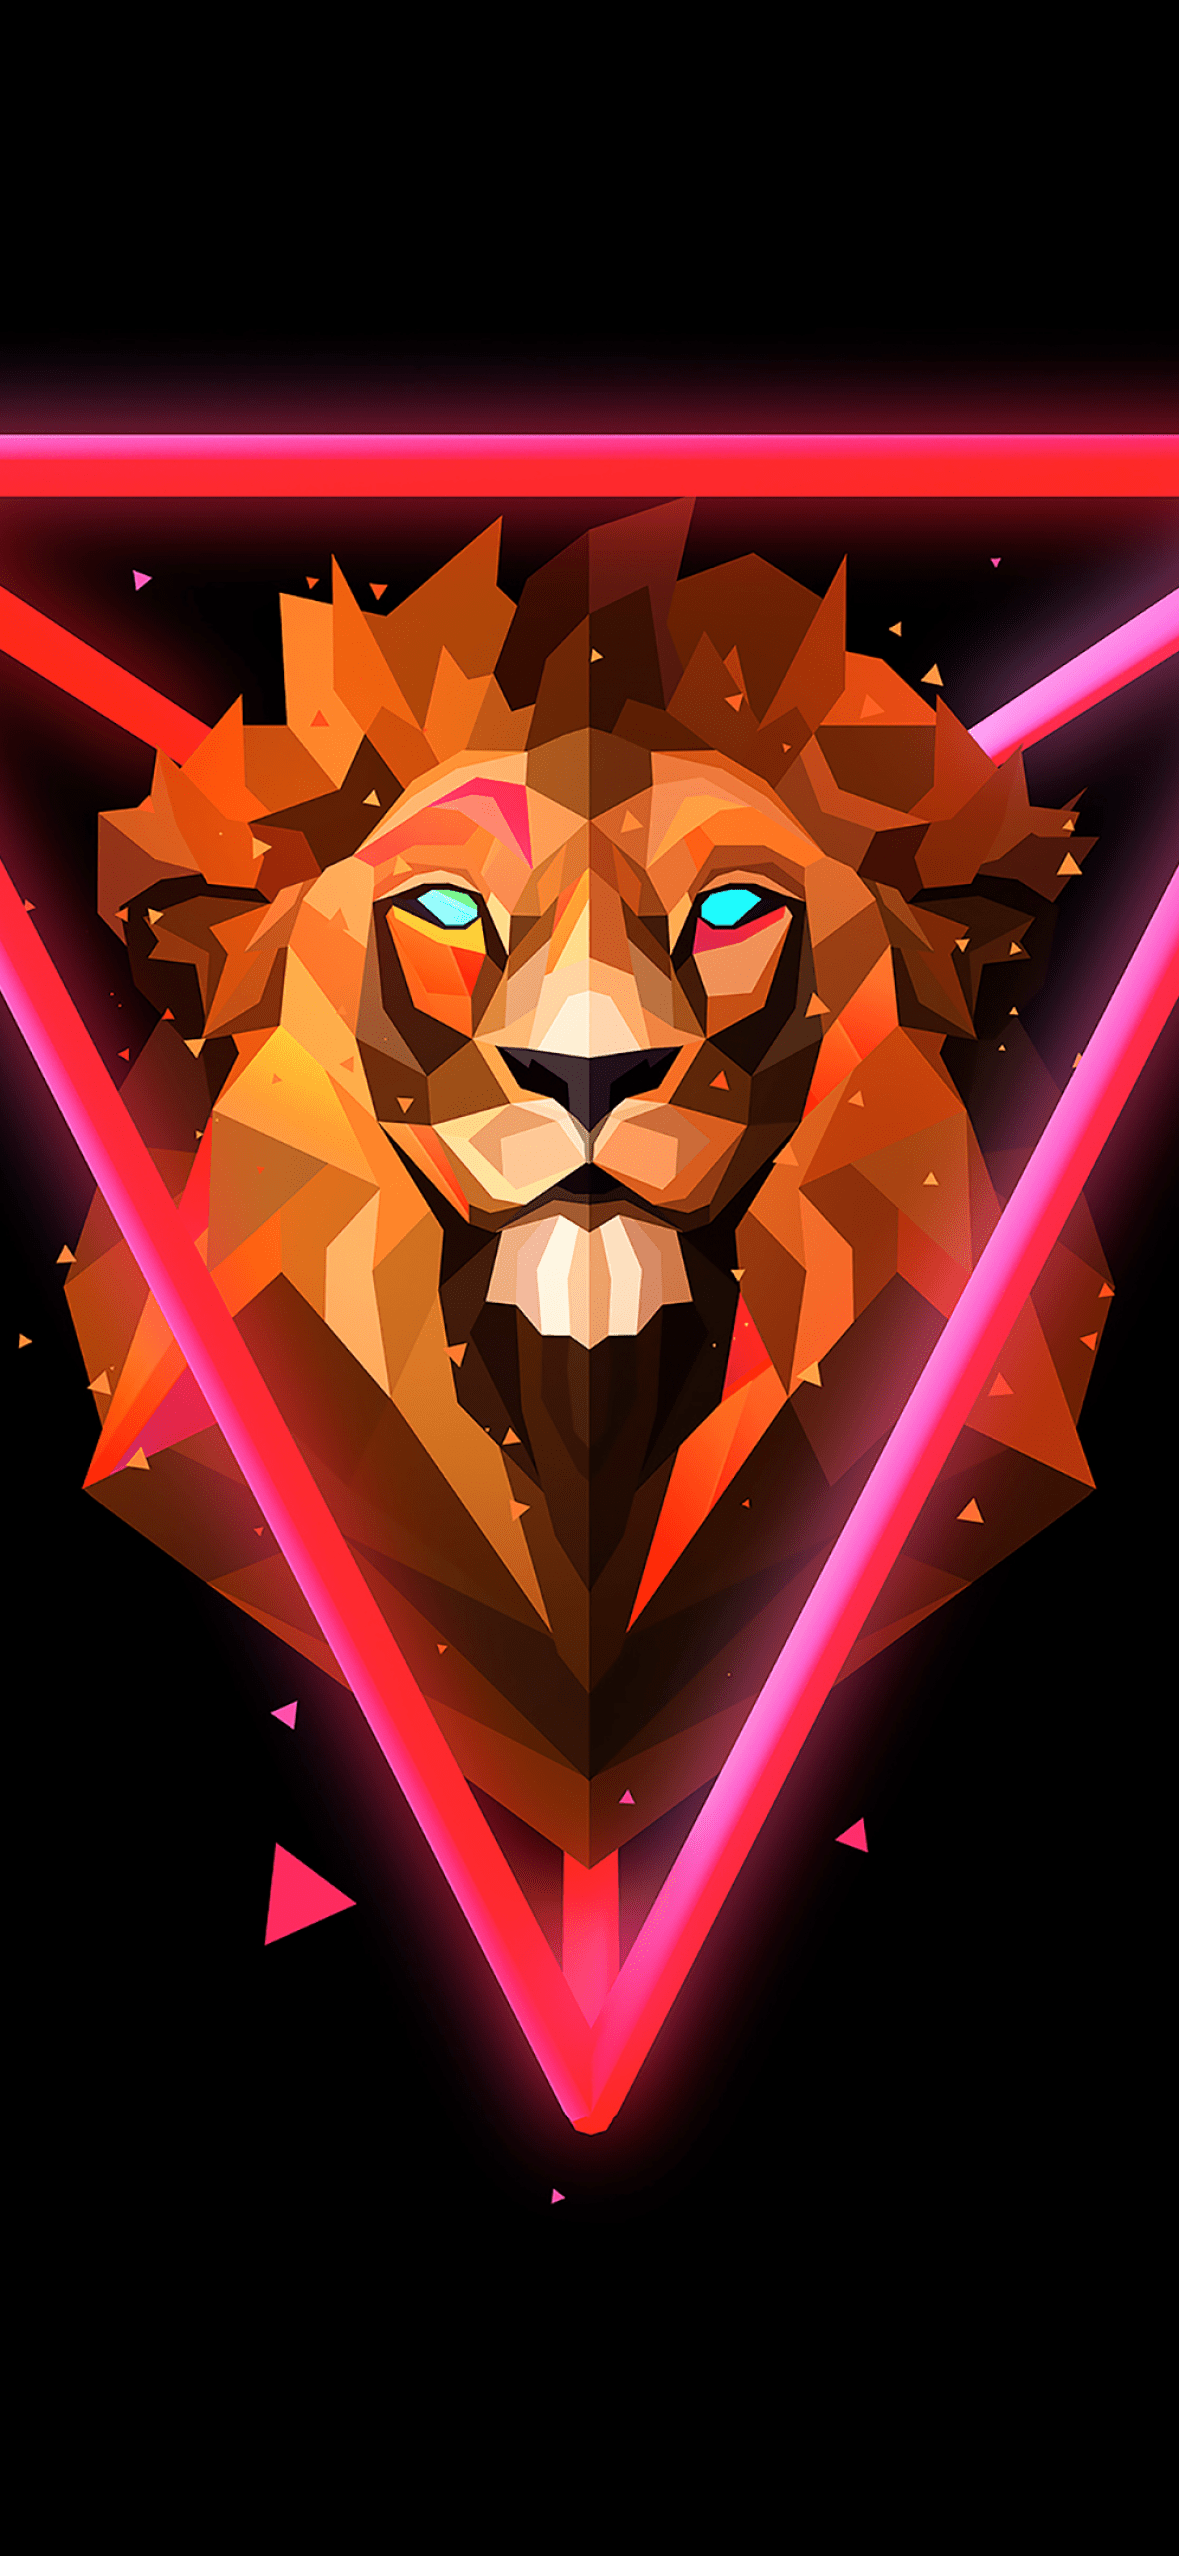 A lion with a red neon triangle around it - Low poly